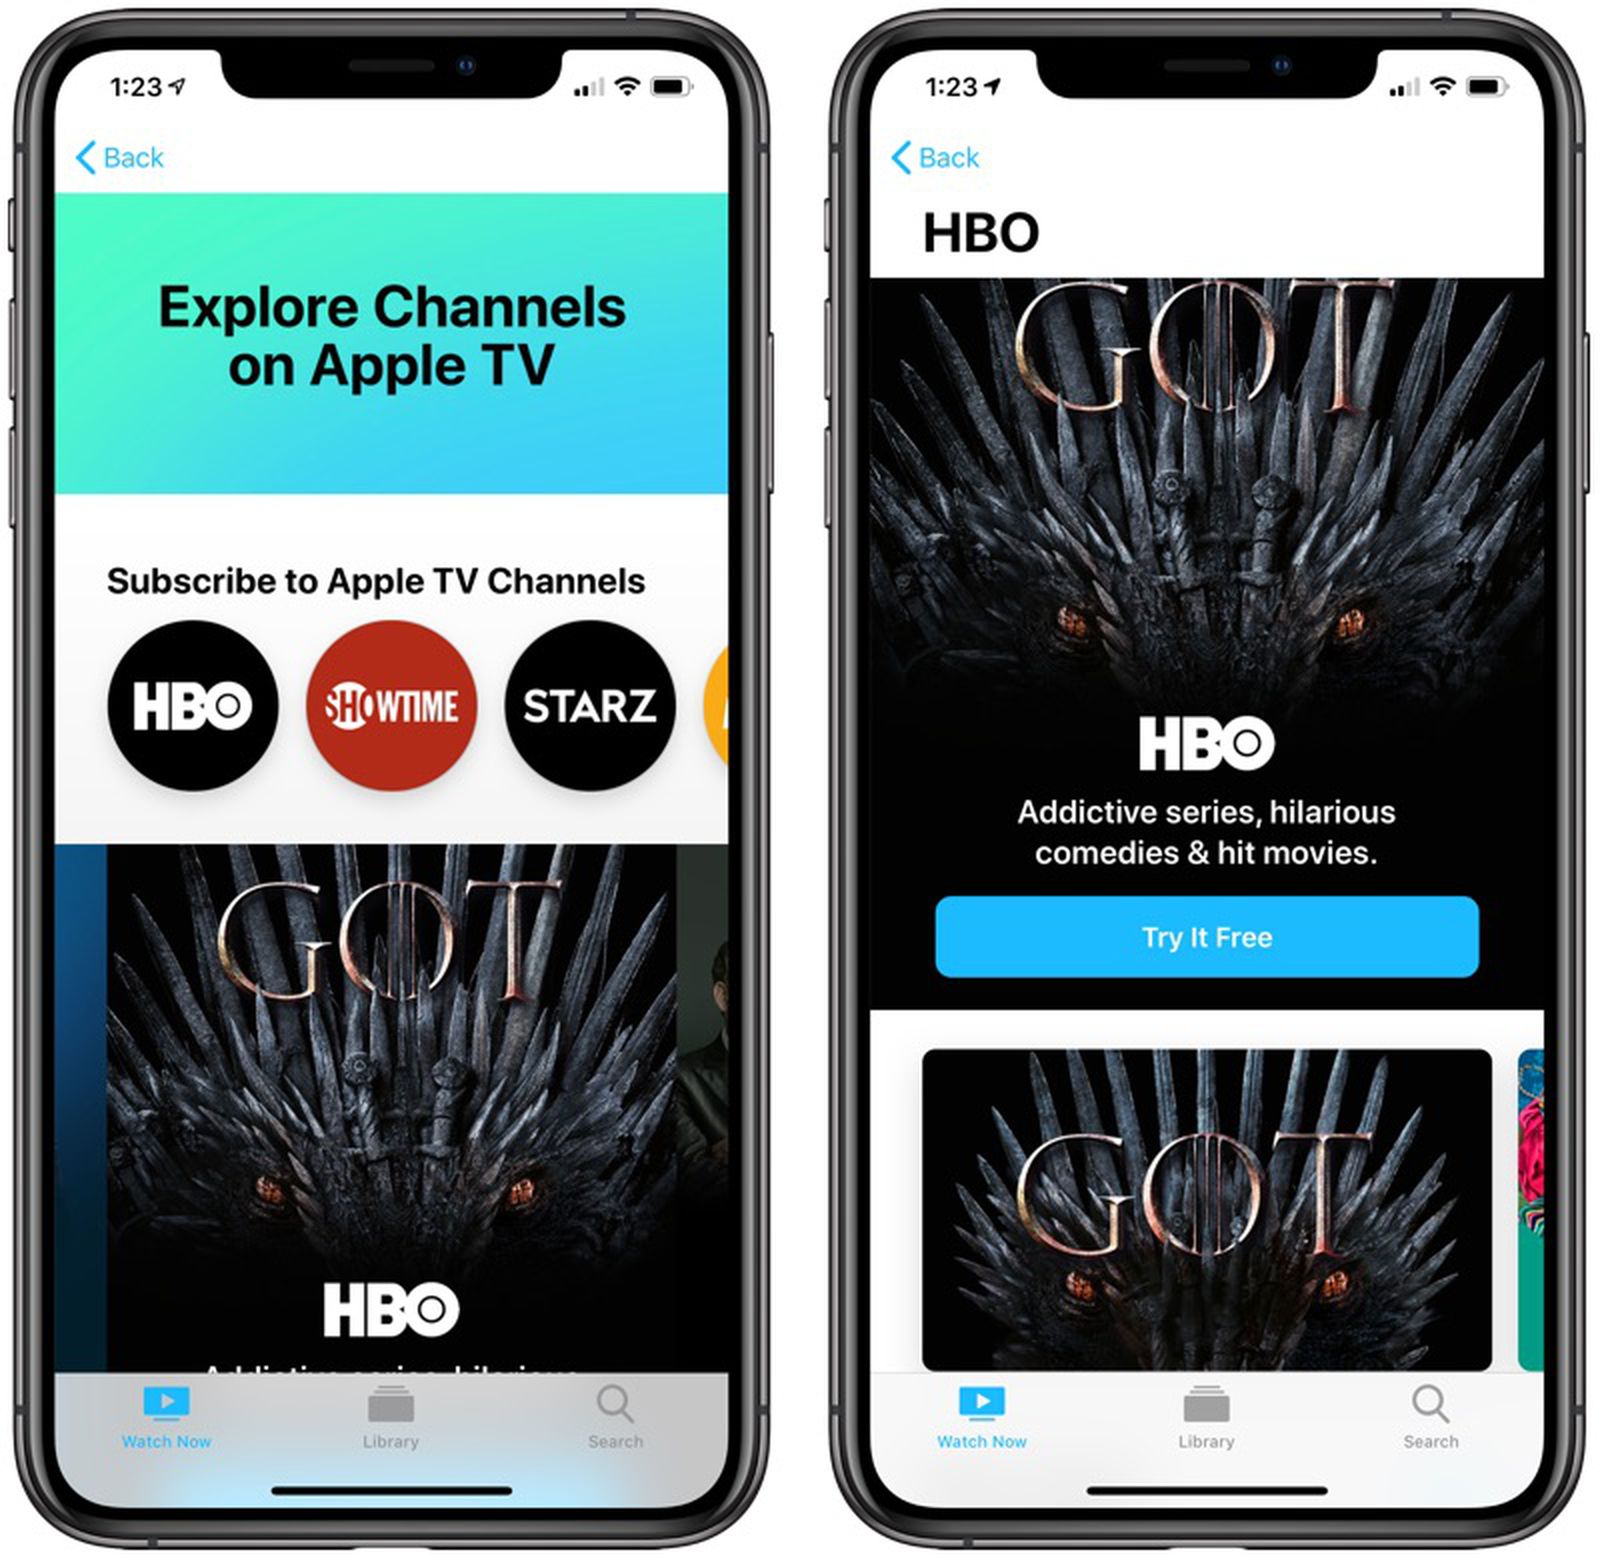 Apple Releases iOS 12.3 With TV App and Channels Feature - MacRumors